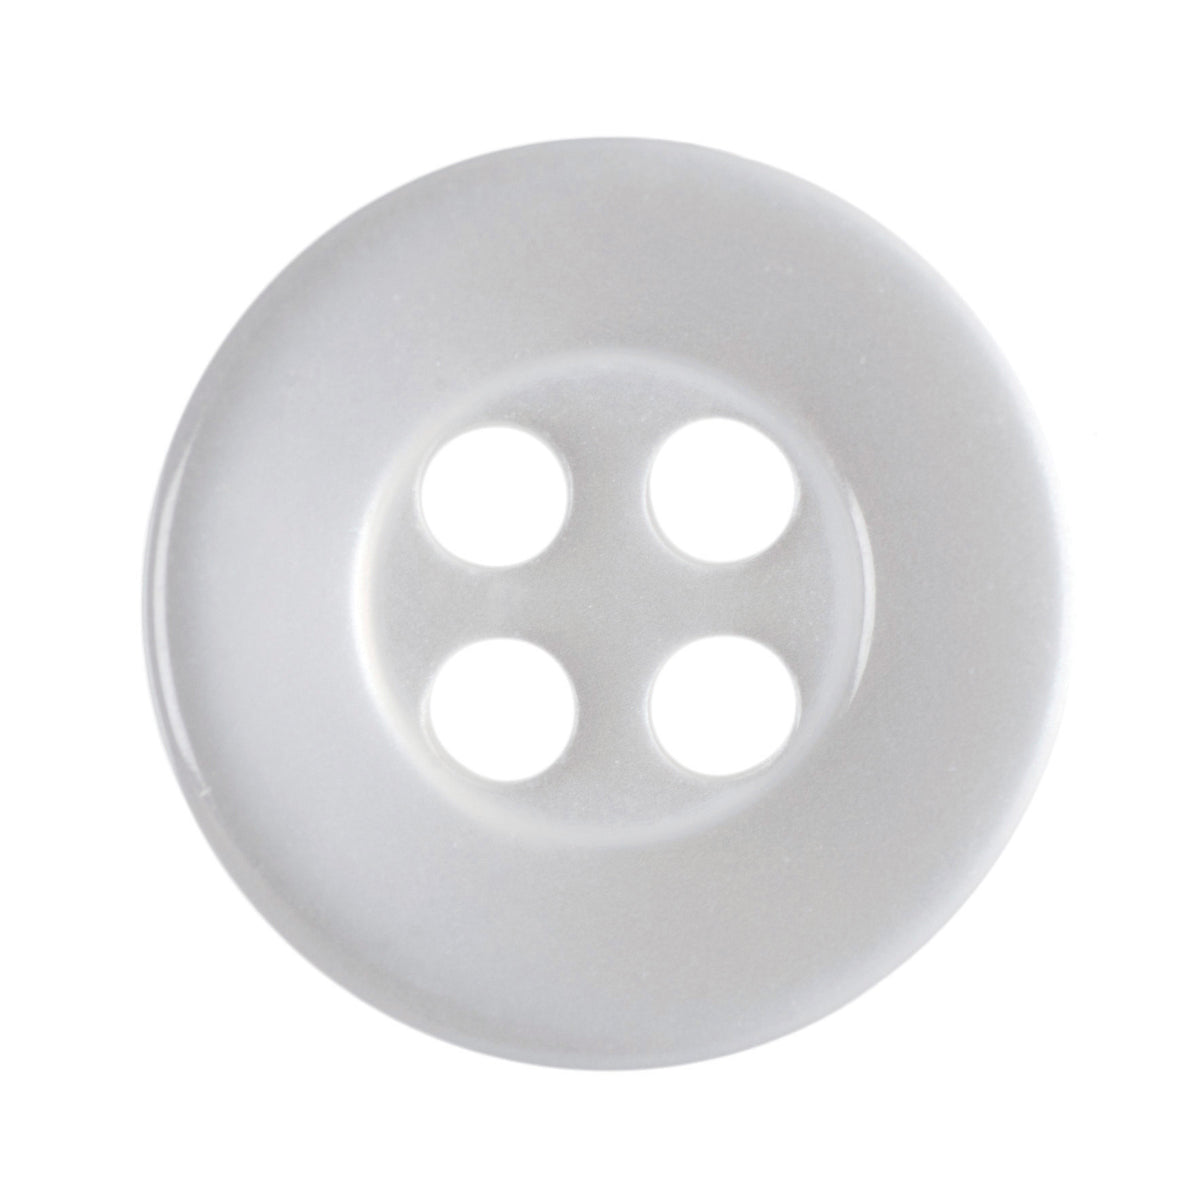 Hemline Small Pearlescent White Buttons